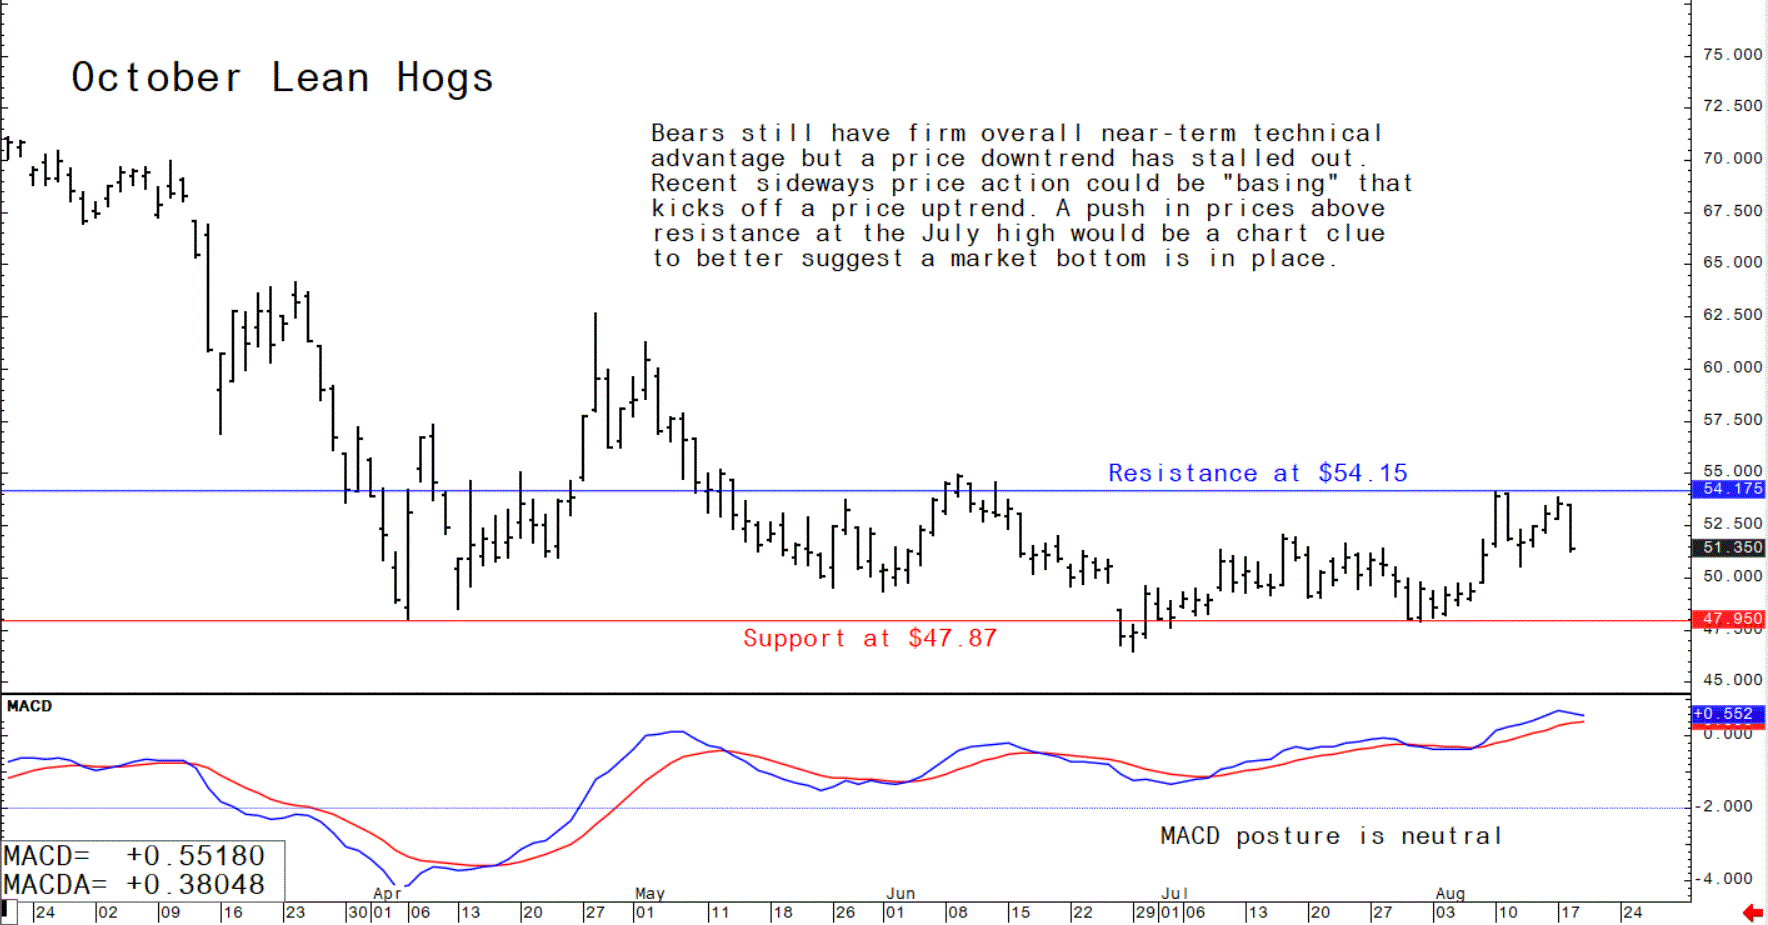 Bears still have firm overall near-term technical advantage but a price downtrend has stalled out. Recent sideways price action could be "basing" that kicks off a price uptrend. A push in prices above resistance at the July high would be a chart clue to better suggest a market bottom is in place.